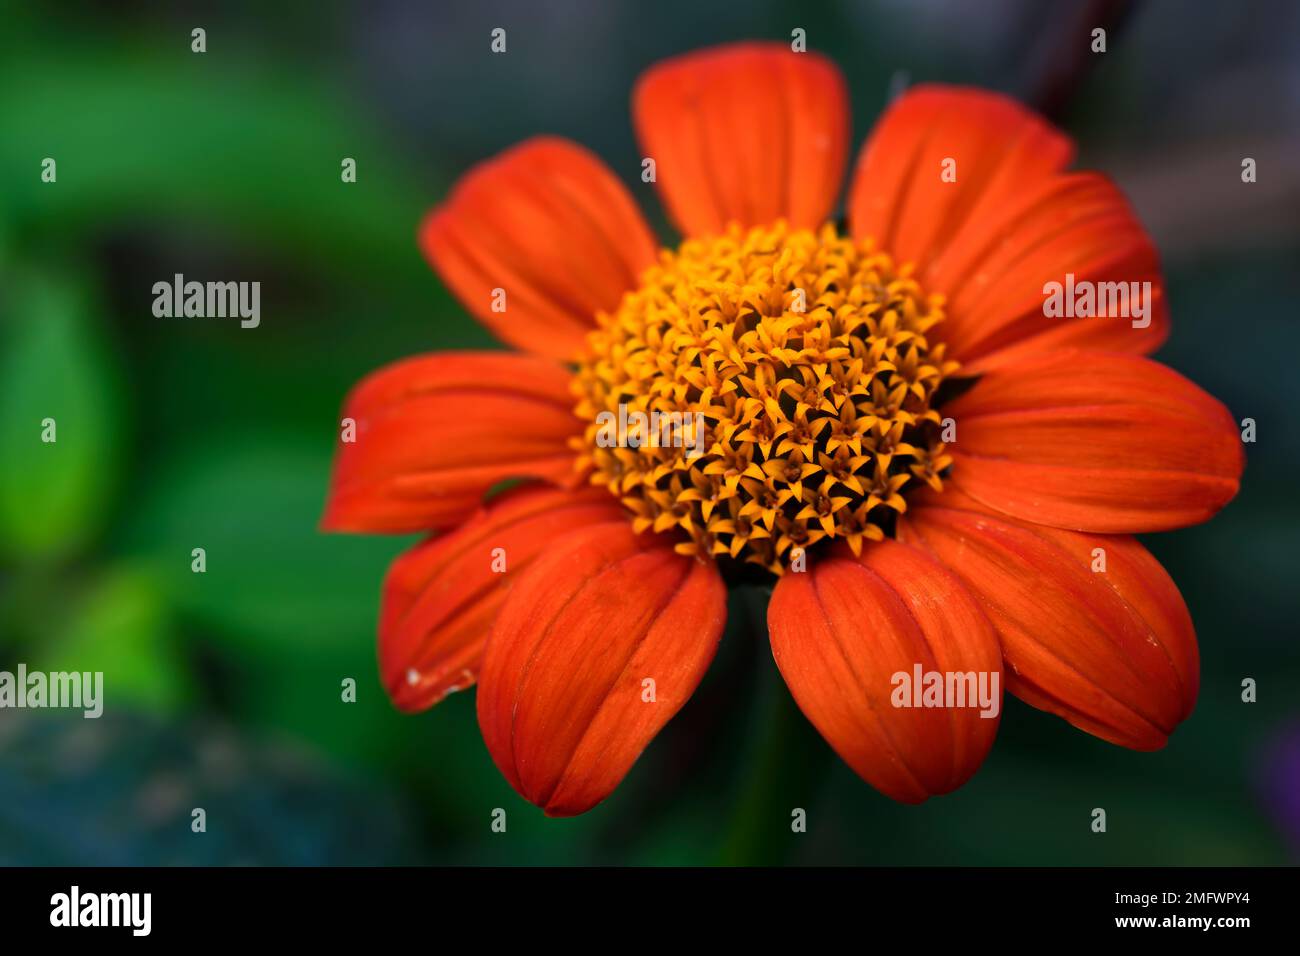 Tithonia rotundifolia Torch,mexican sunflower,Half-Hardy Annual,orange,flower,flowers,flowering,tropical,exotic,RM Floral Stock Photo